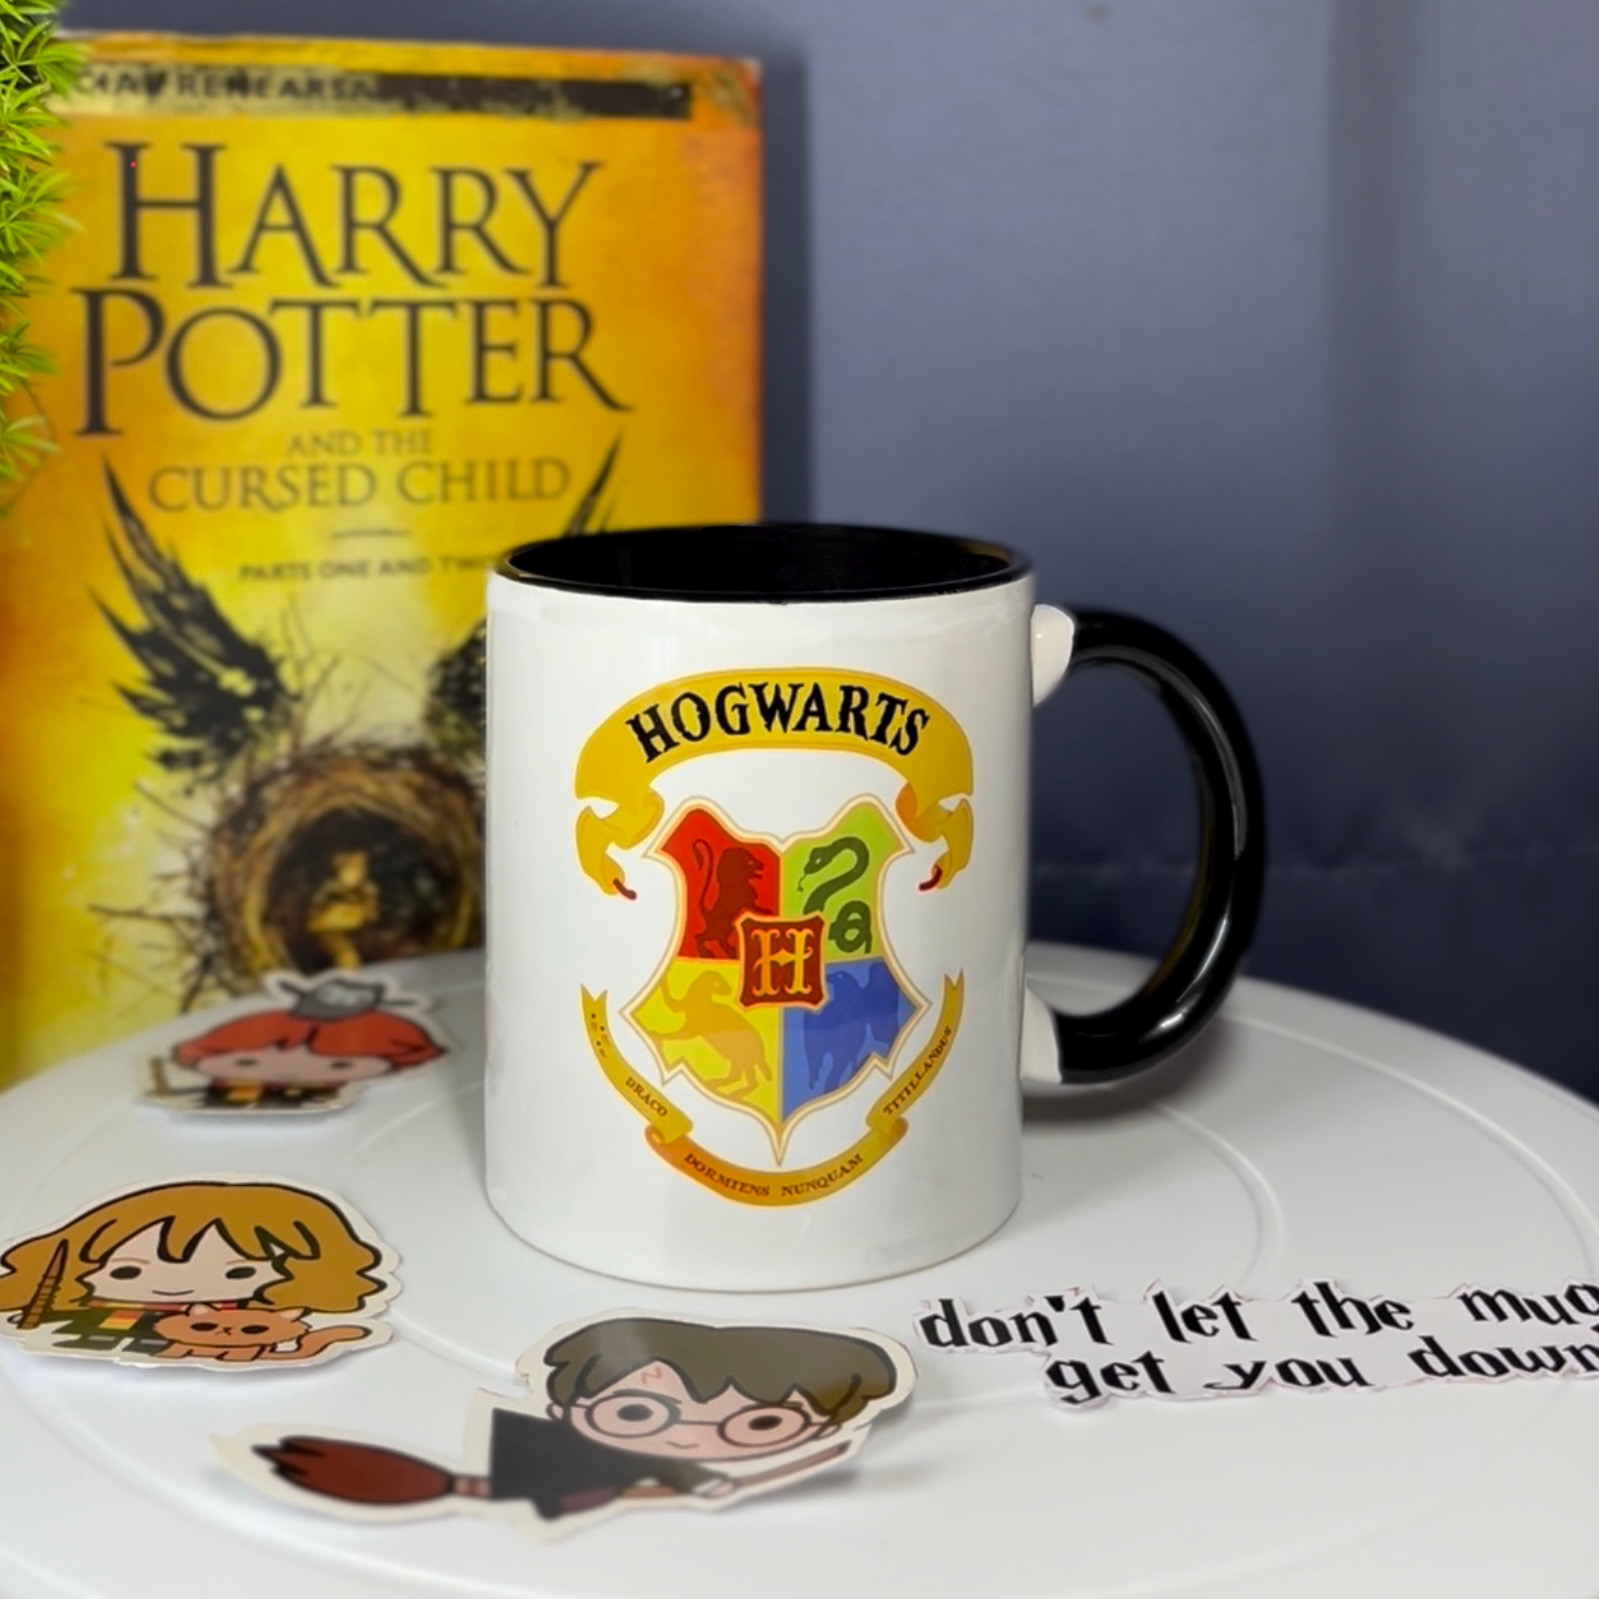 For the love of Harry Potter, Hogwarts & quirky coffee mugs. Makes an excellent gift choice for those in love with the potterworld.